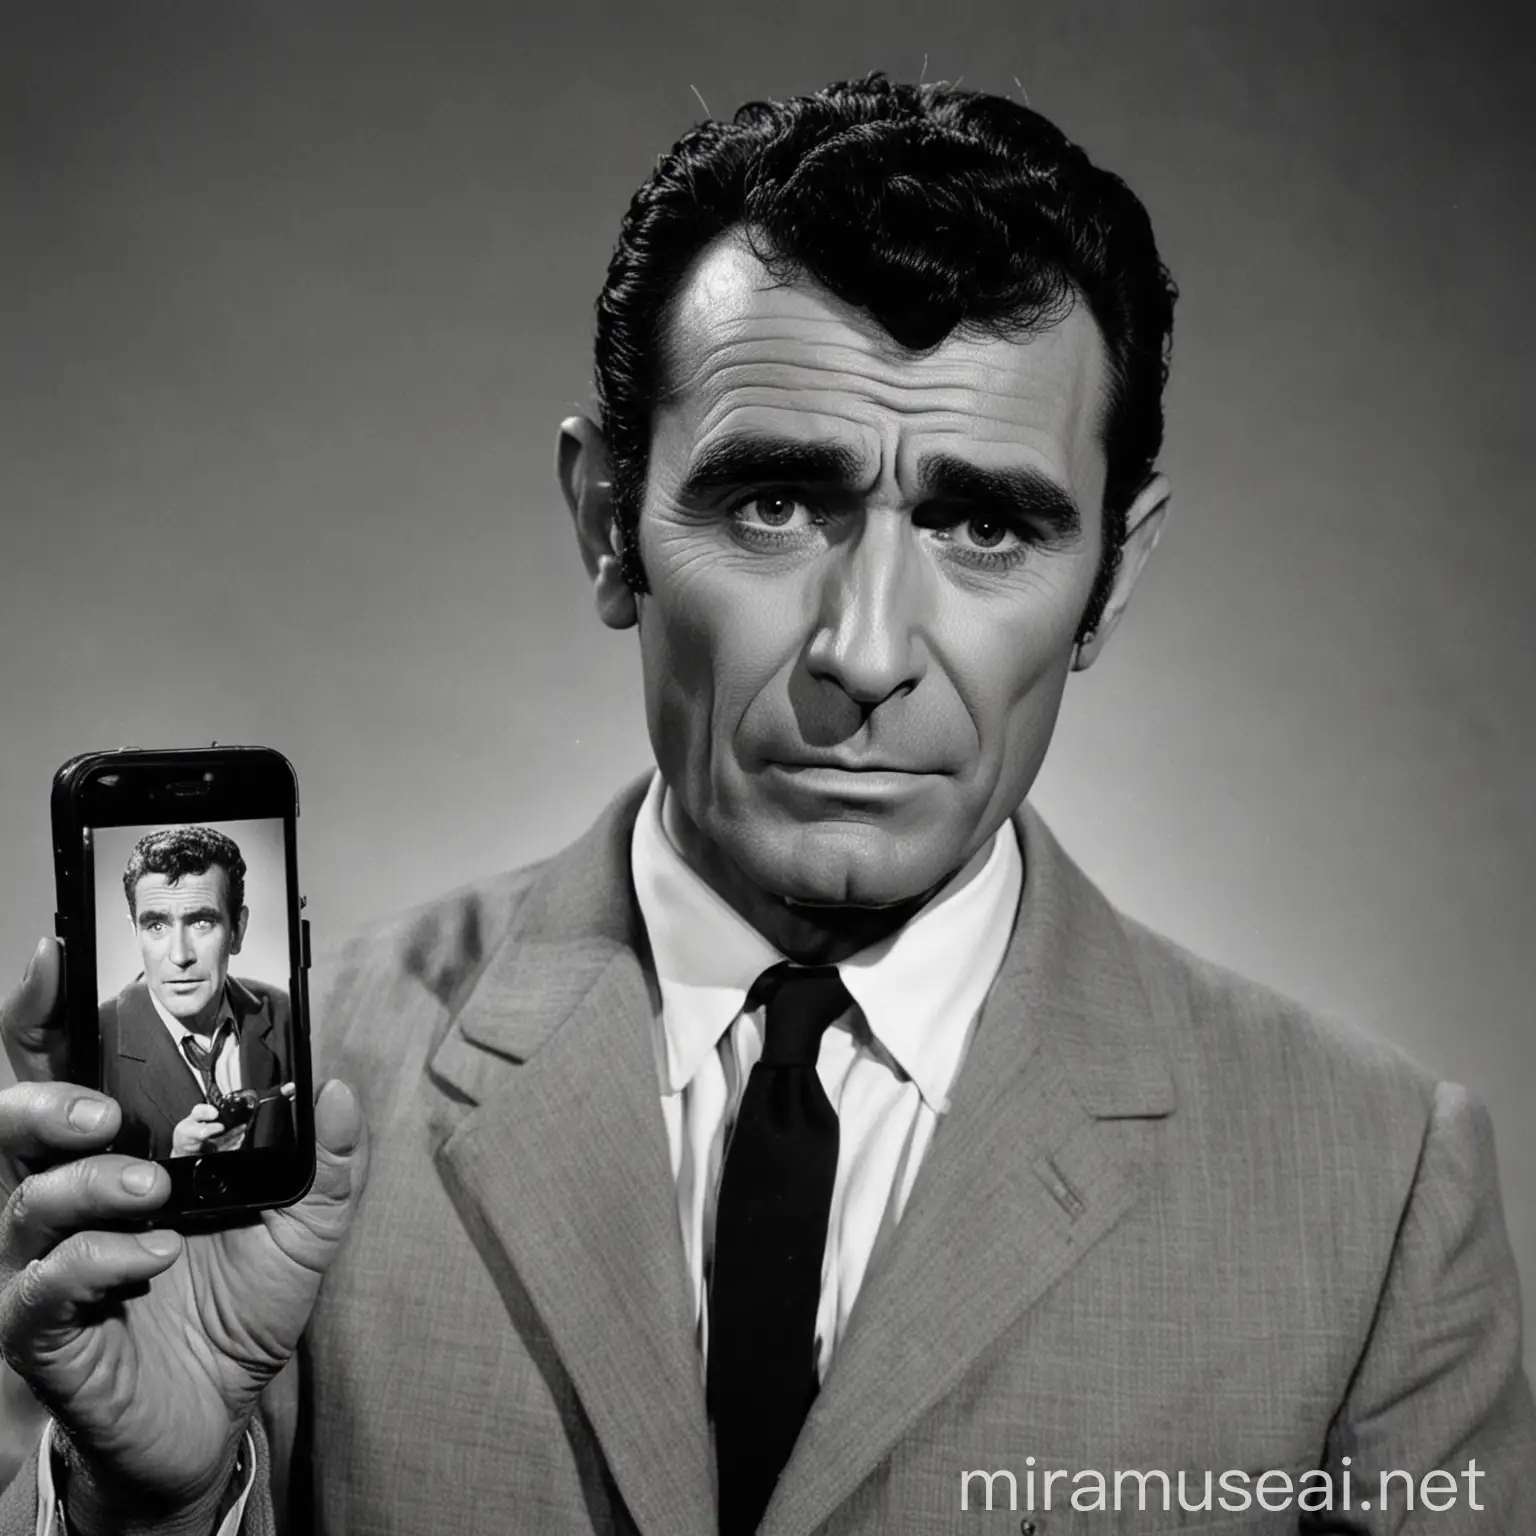 Rod Serling Needs To Get Out On This Smartphone Tomorrow Morning At 5:00 a.m.